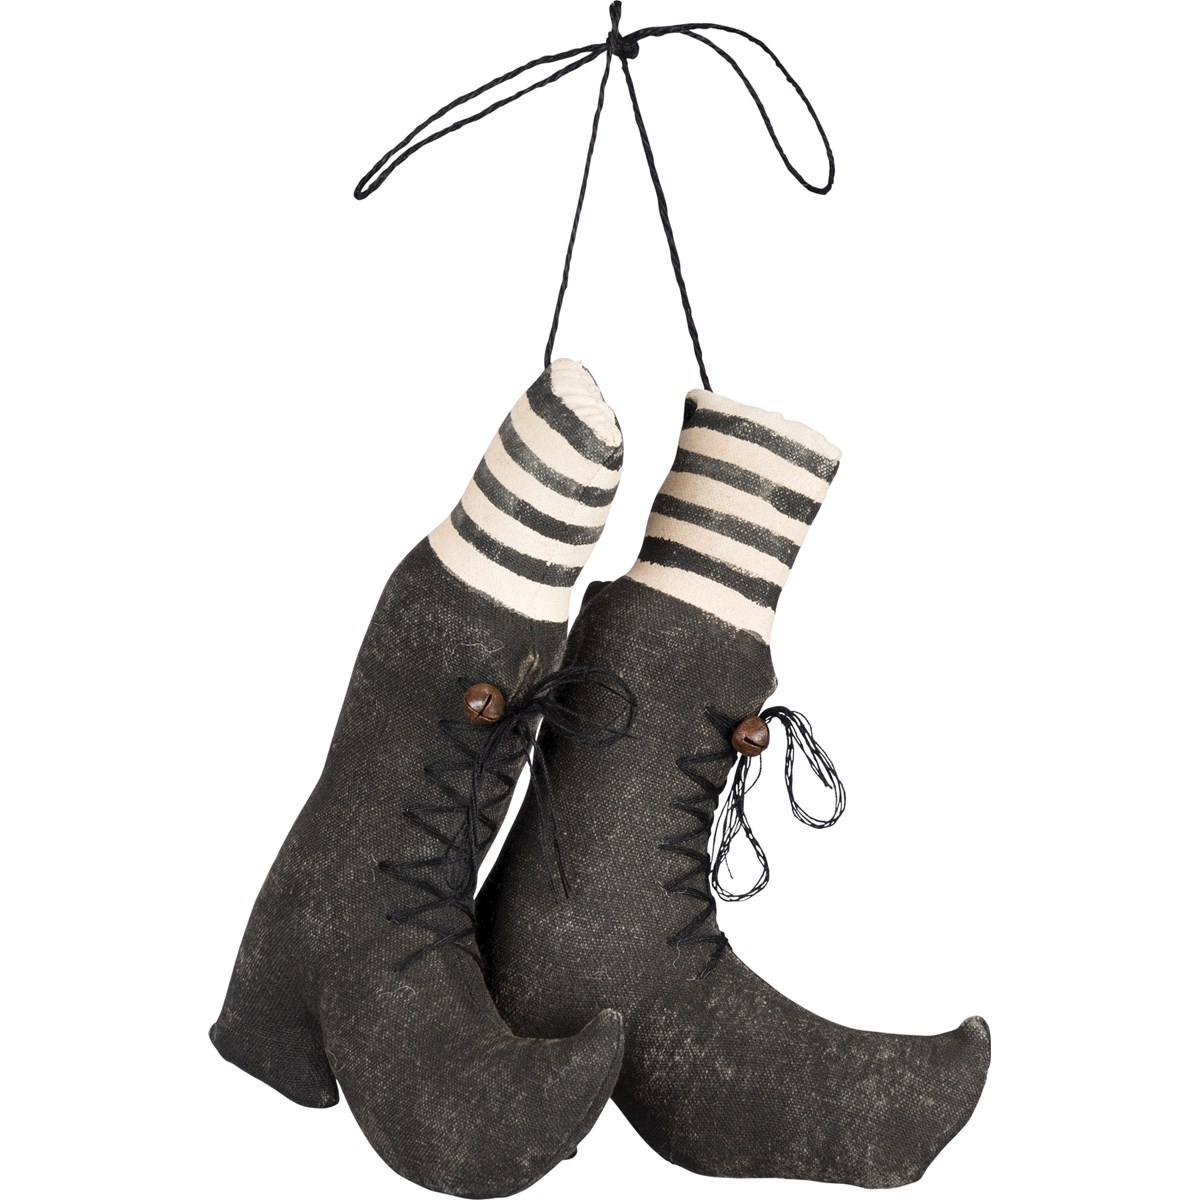 Fabric Witches' Boots - 6" x 8" x 2" - Cotton, String, Metal